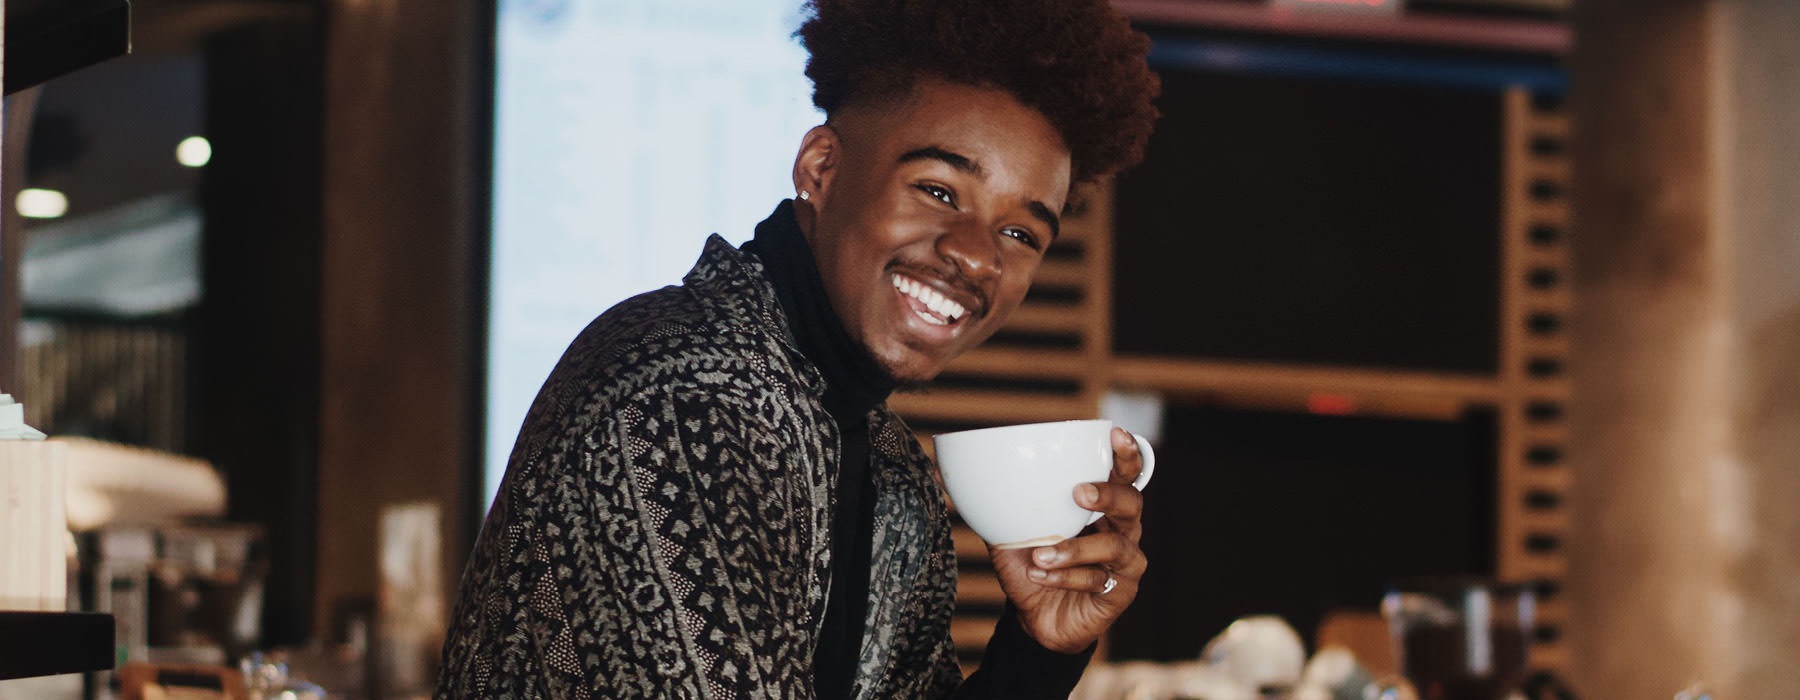 young man smiles in a local cafe with a cup of coffee